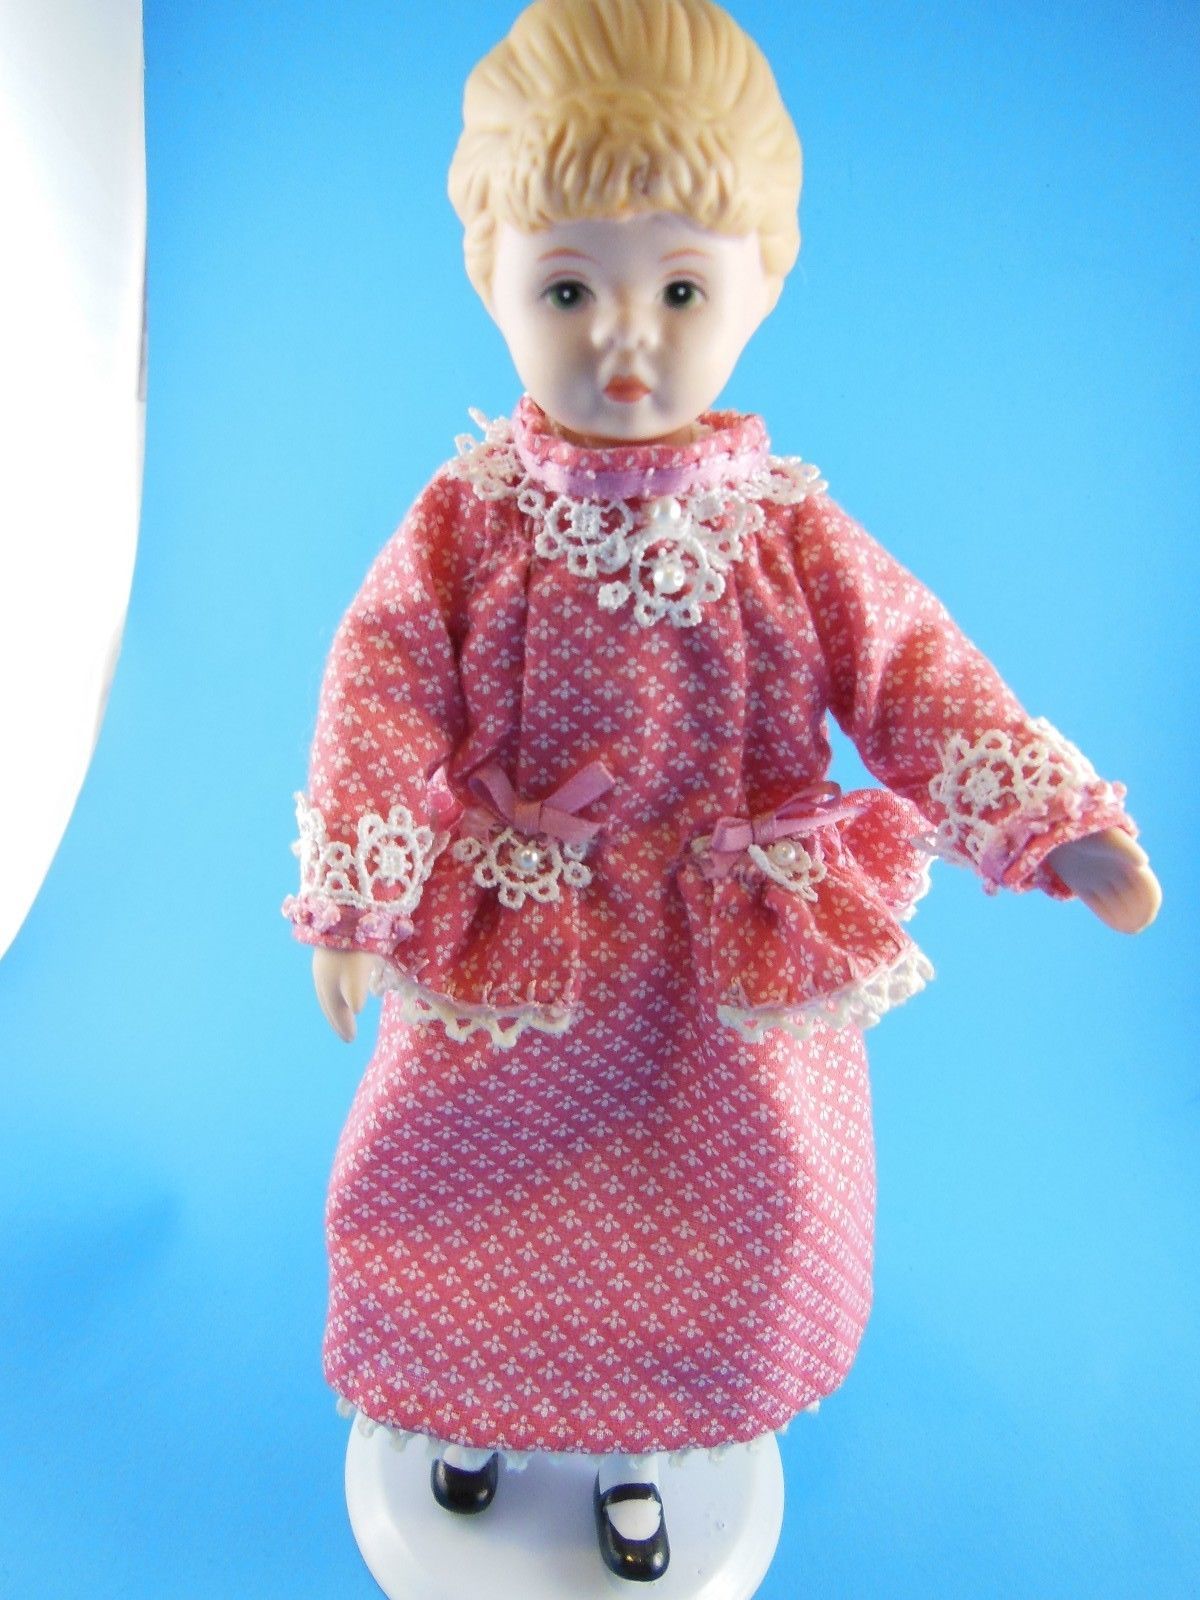 Primary image for 8.5" Porcelain Doll with Pink Dress & Stand Maybe Avon Doll PRETTY